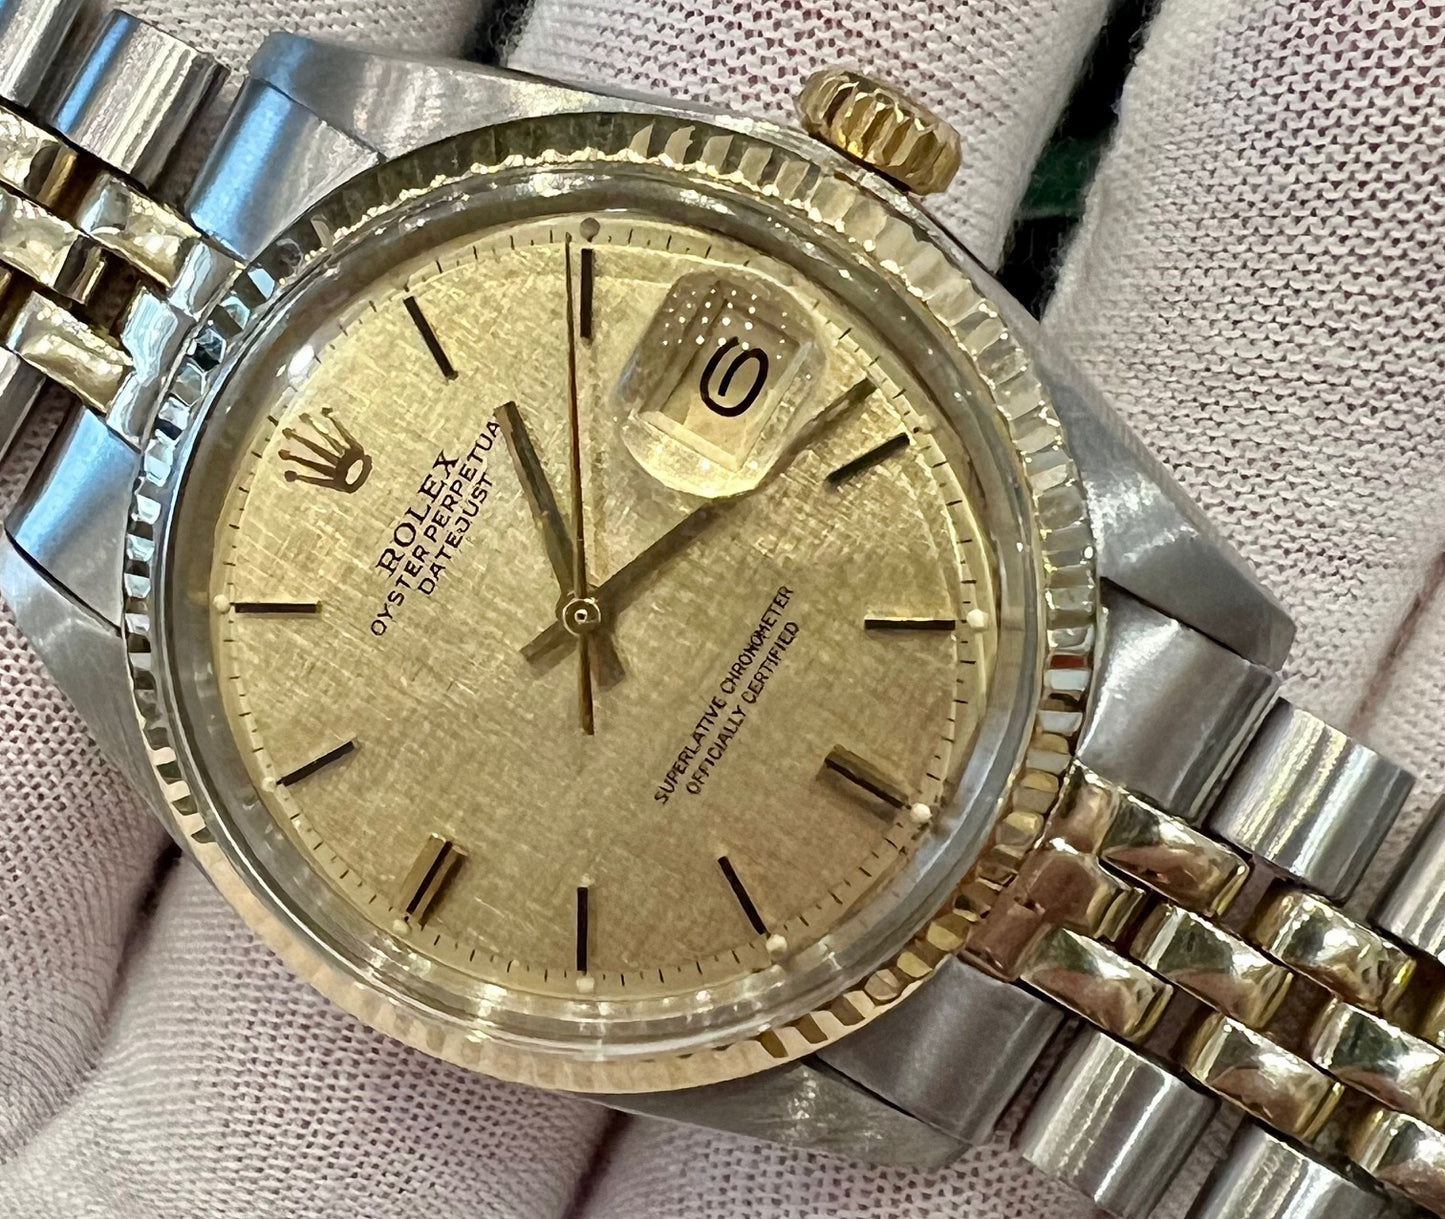 Rolex Datejust 36mm 1601 Champagne Dial 1973 only watch